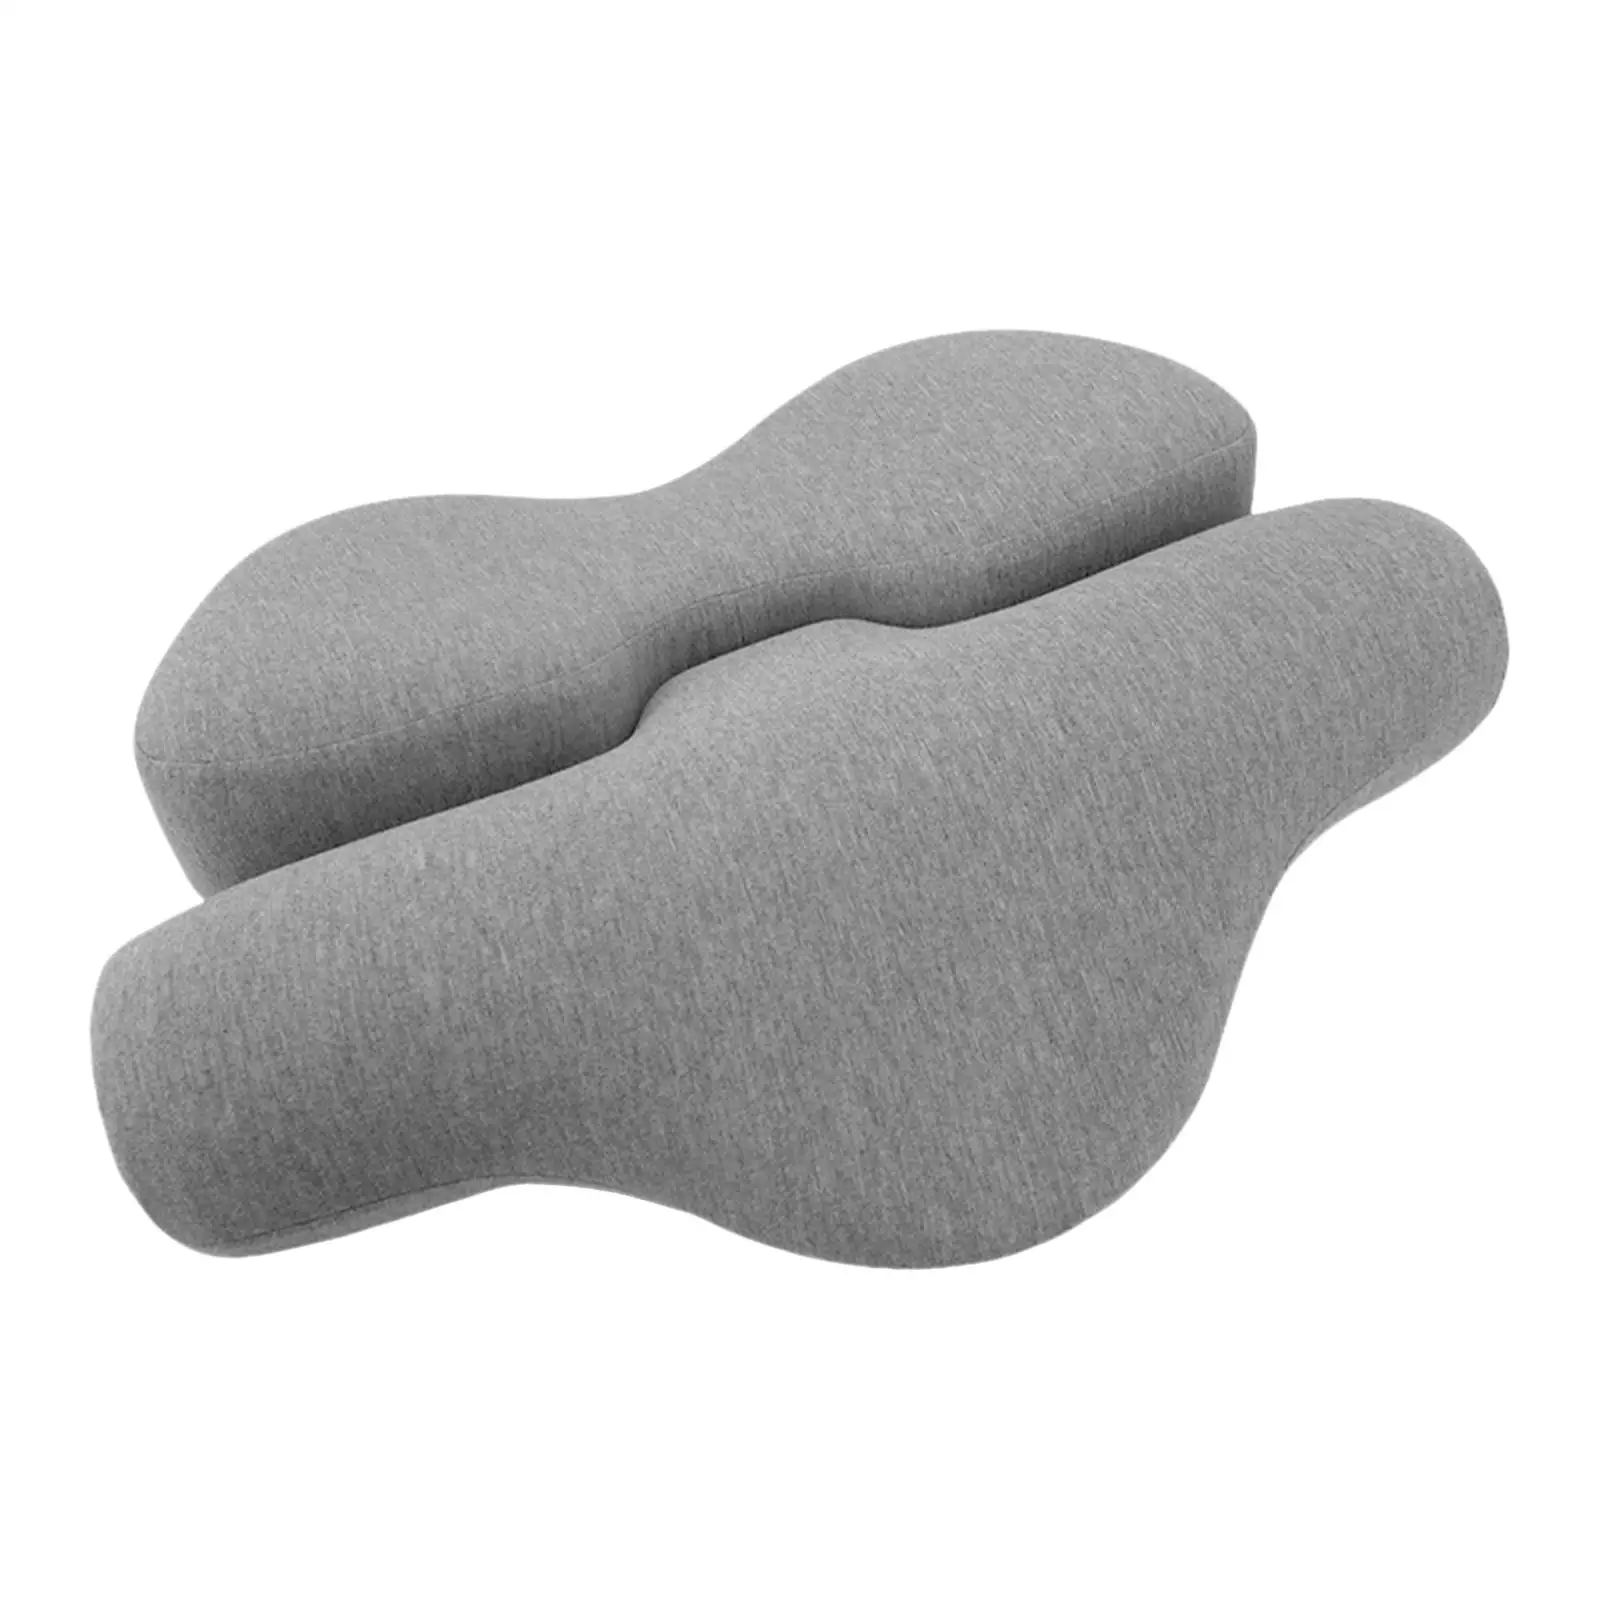 Cervical Pillow Memory Foam pillow Neck and Shoulder Relaxation Neck Pillow